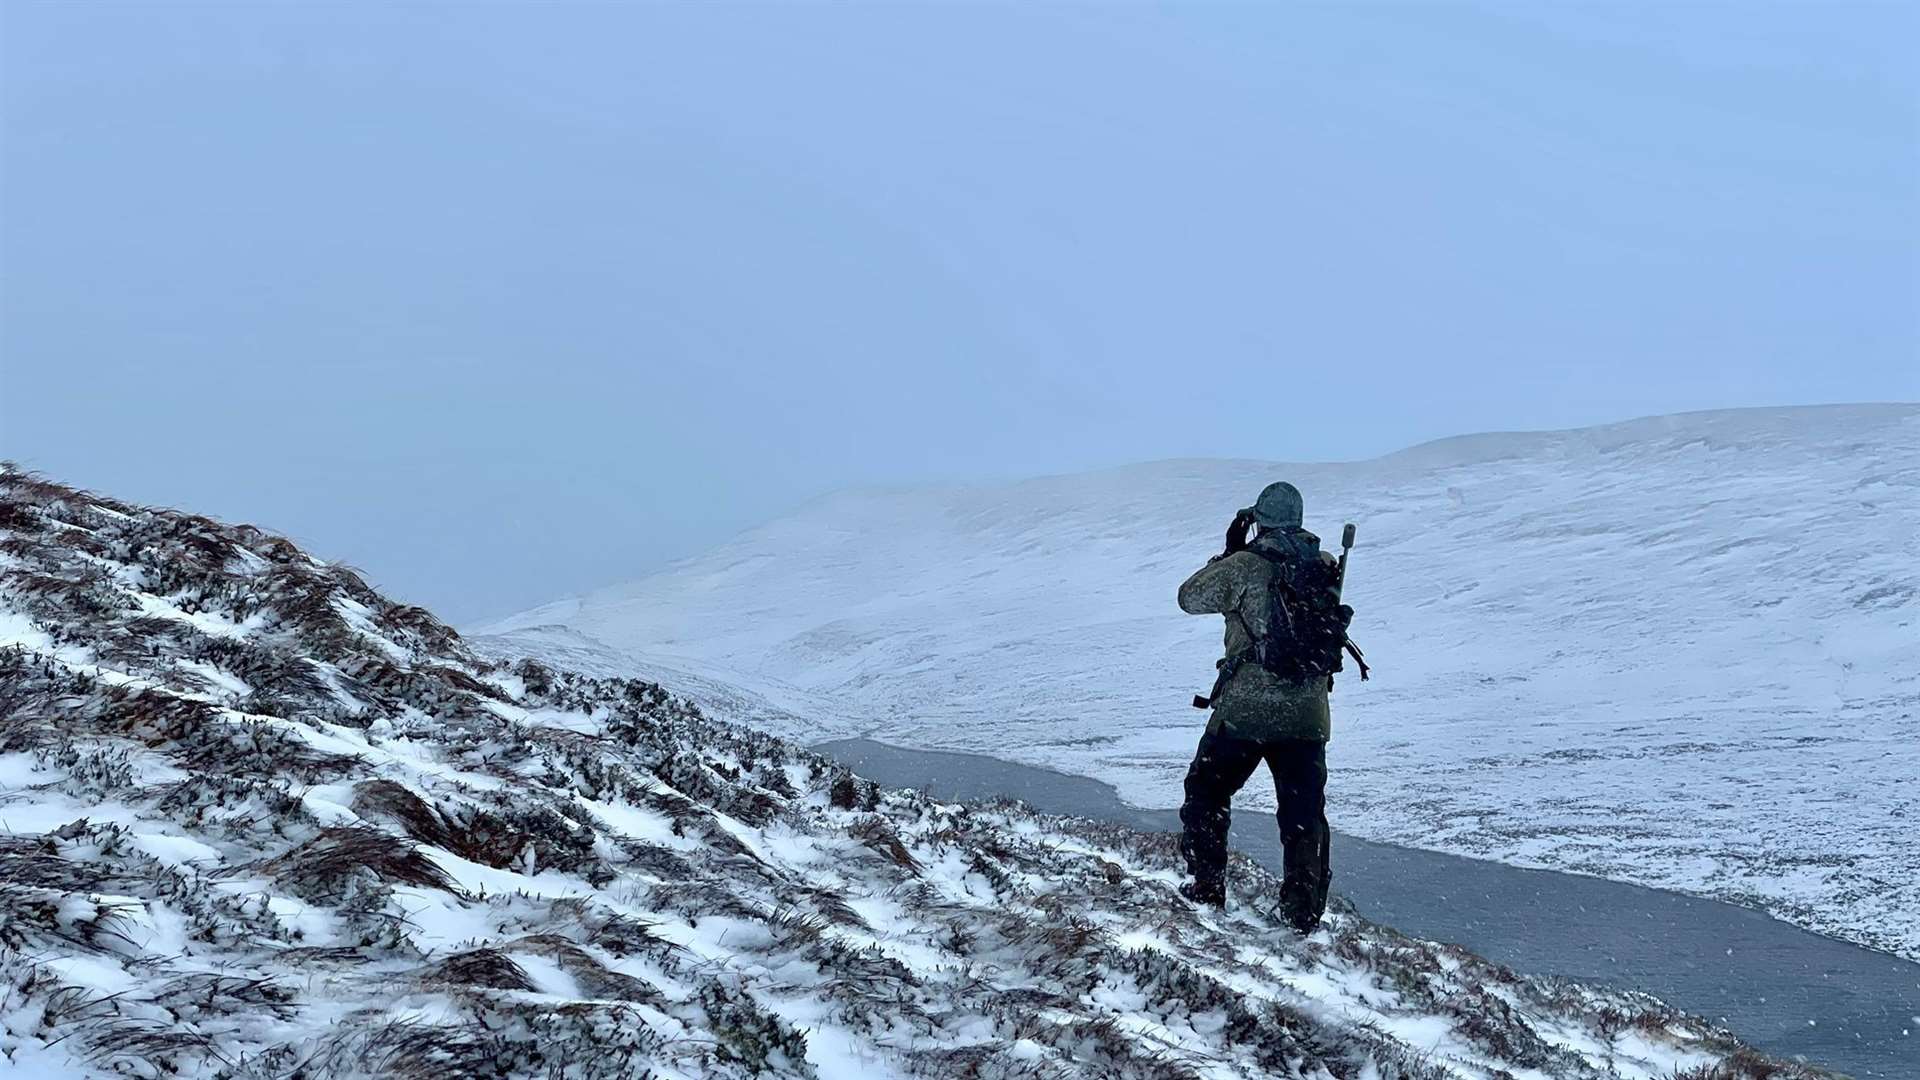 Stalkers faced challenging winter conditions to successfully carry out the cull at Loch Choire.